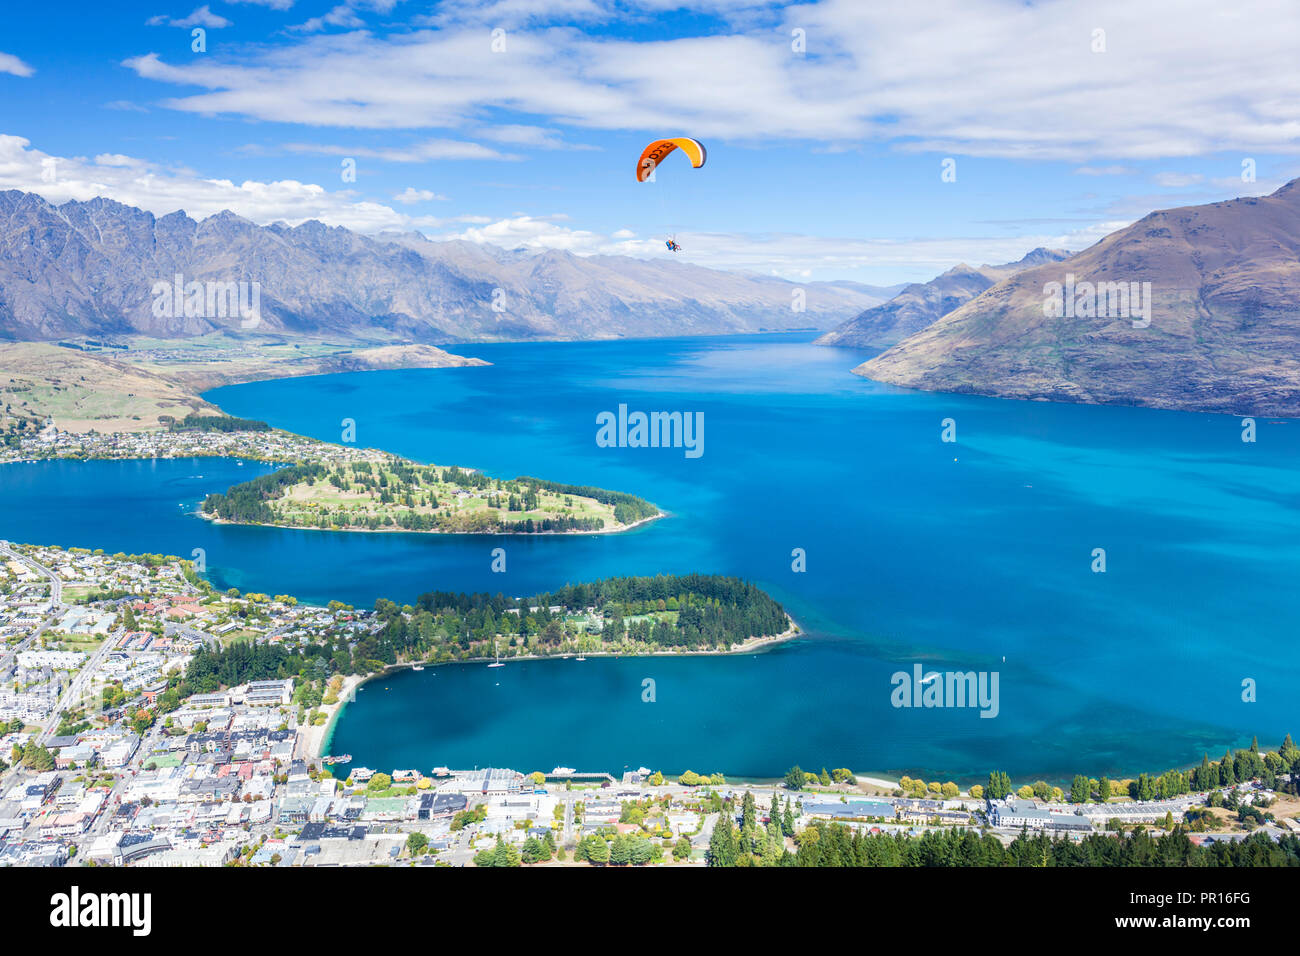 Aerial view of Queenstown, paraglider, Lake Wakatipu and The Remarkables mountains, Queenstown, Otago, South Island, New Zealand, Pacific Stock Photo